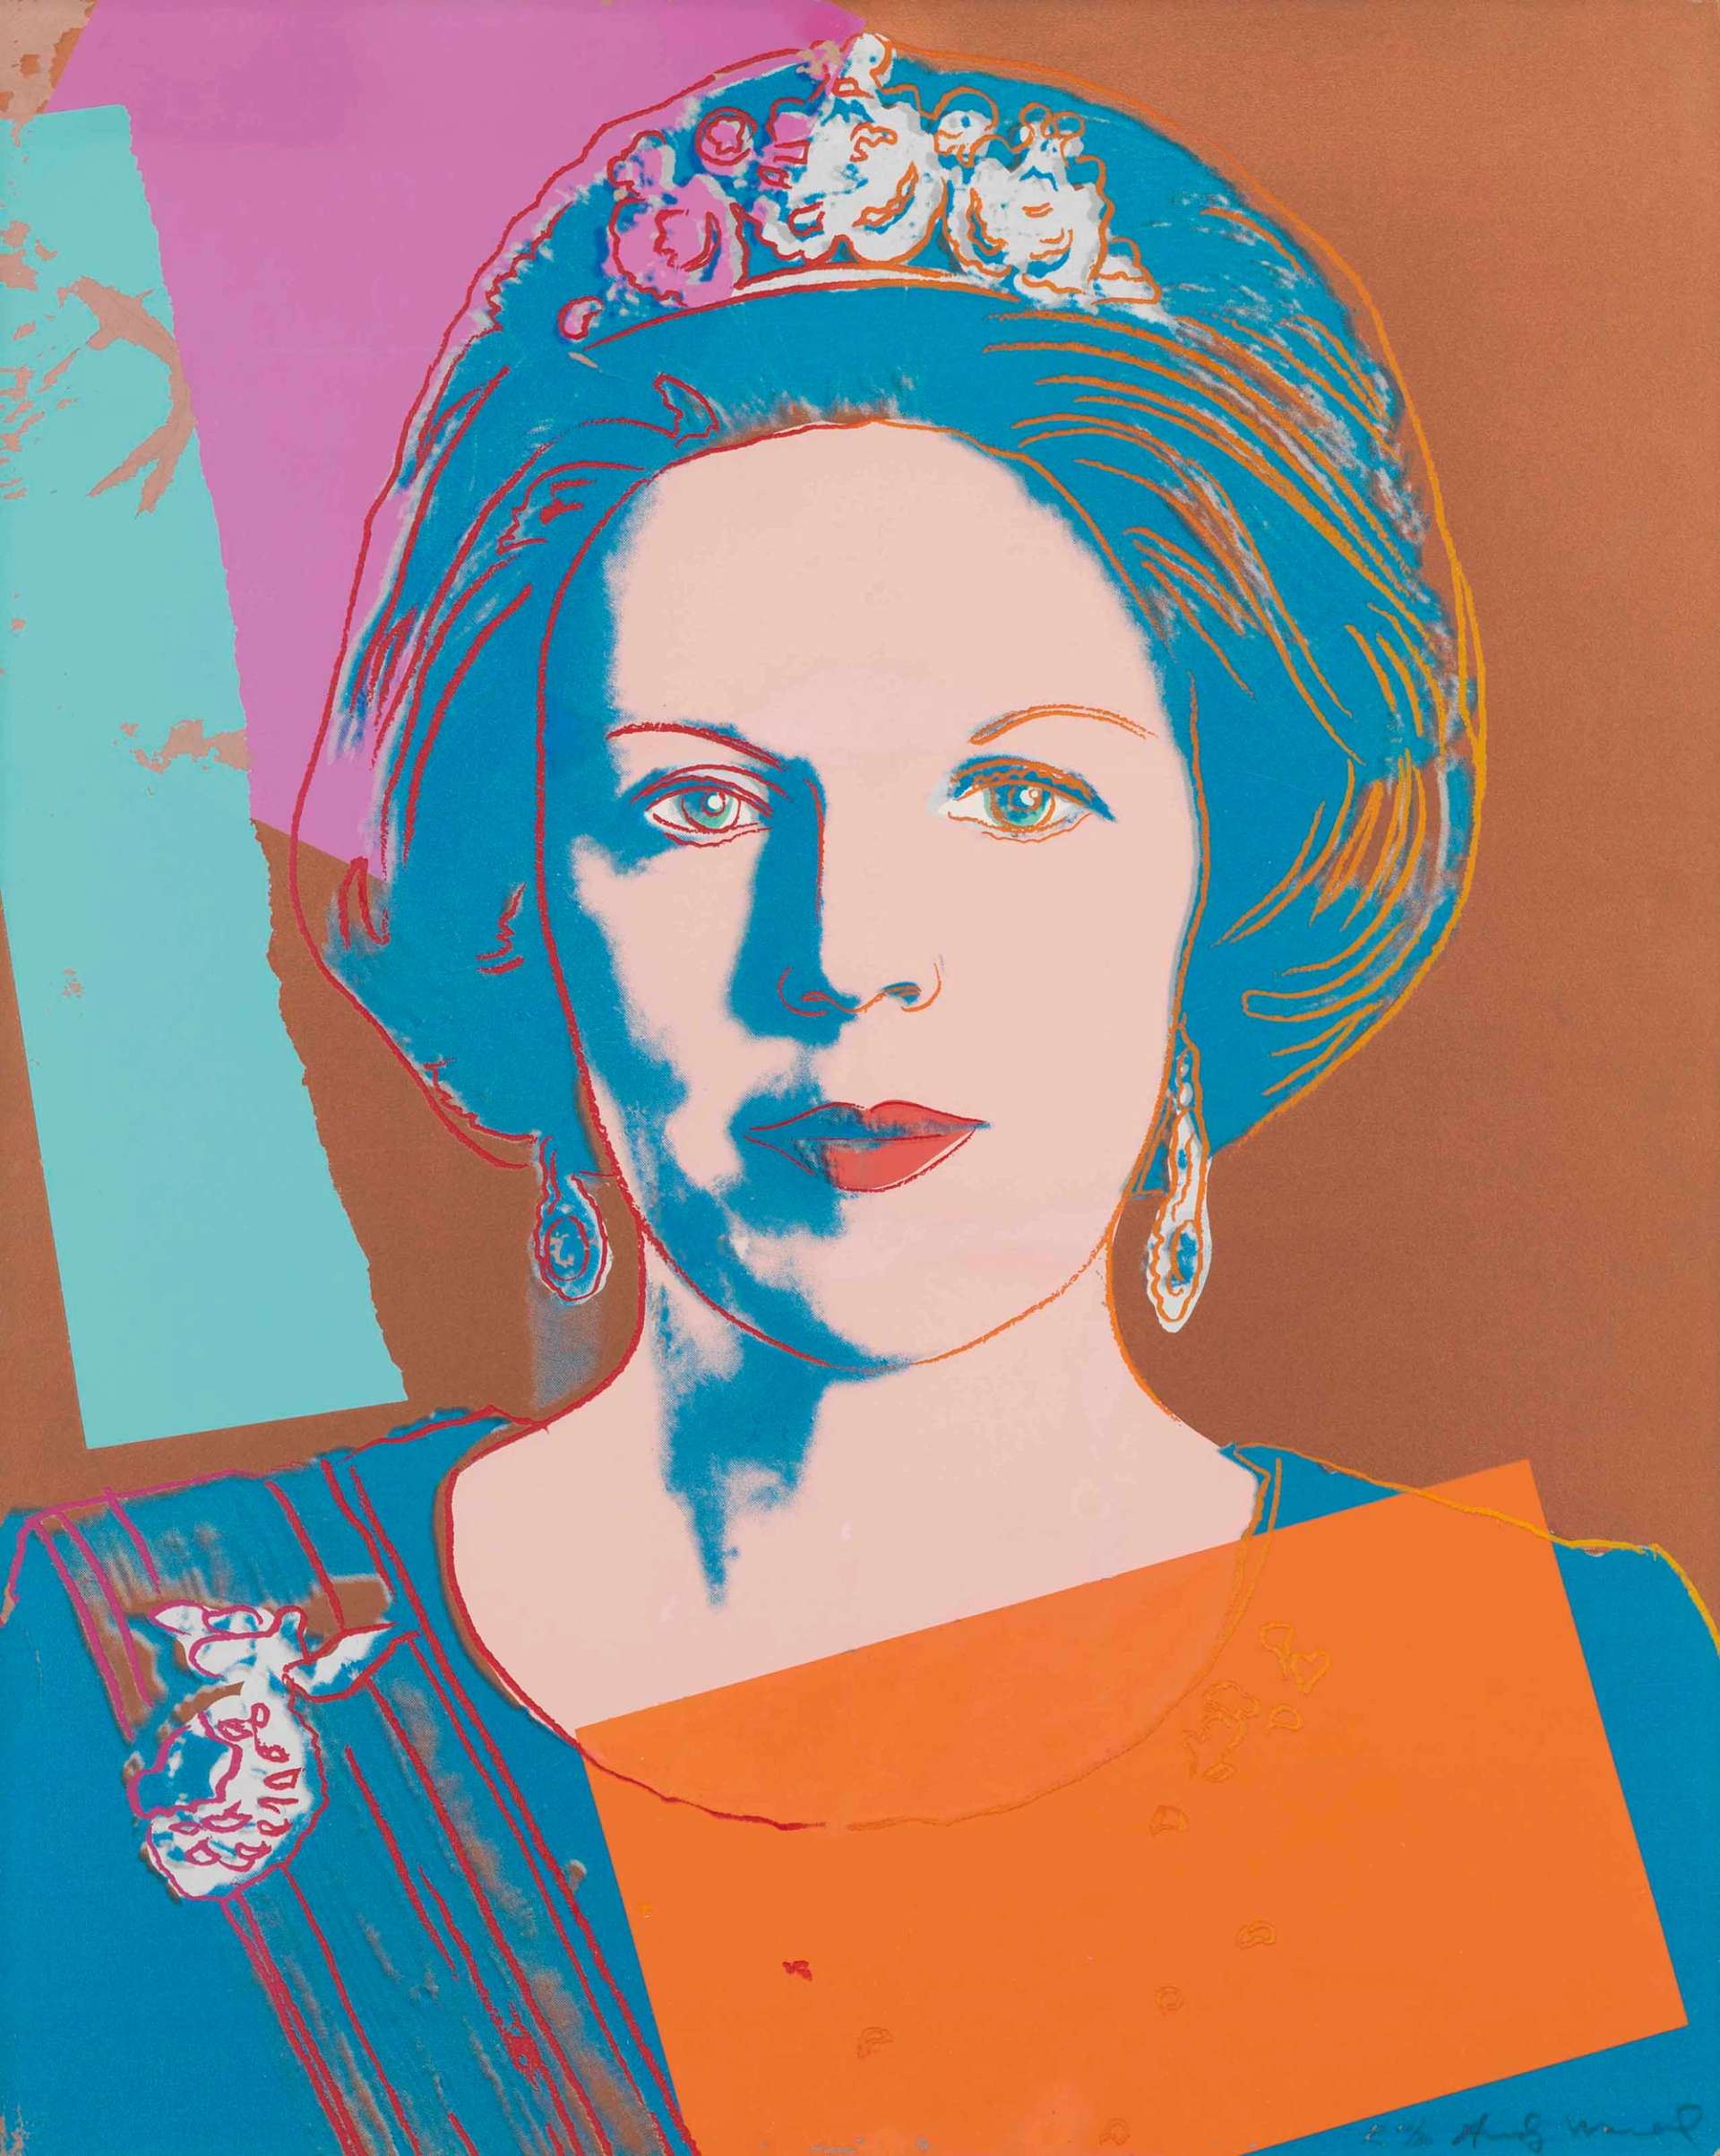 Queen Beatrix Of The Netherlands Royal Edition (F. & S. II.338A) - Signed Print by Andy Warhol 1985 - MyArtBroker